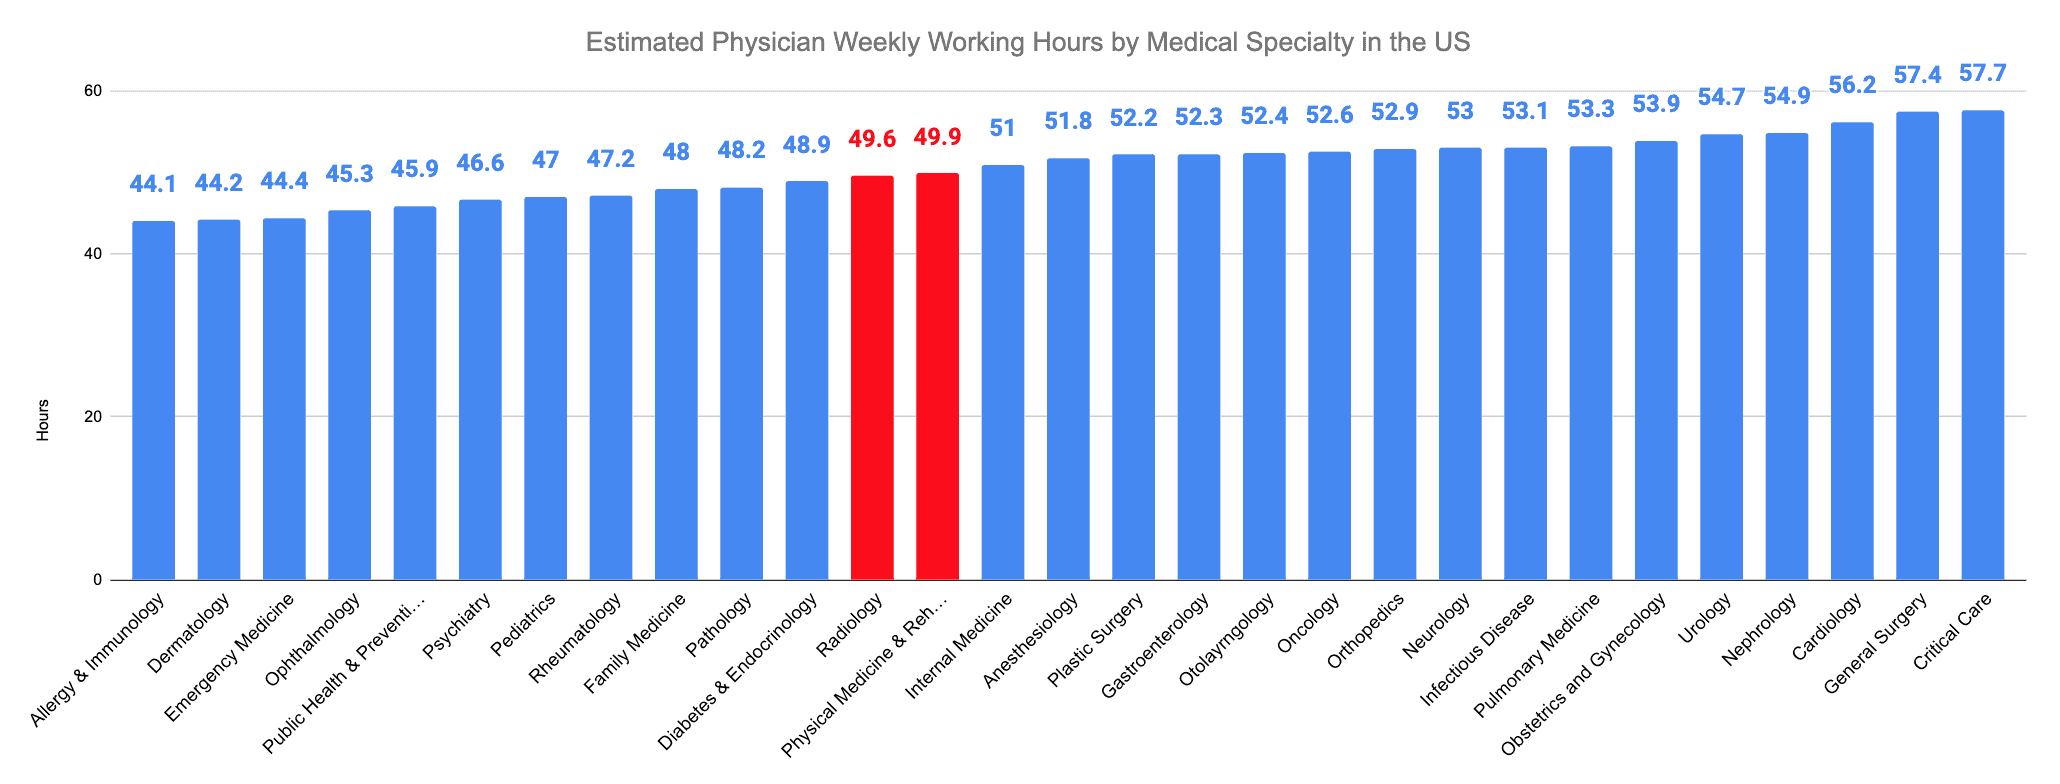 Radiology vs. Physical Medicine &amp; Rehabilitation Estimated Physician Weekly Working Hours by Medical Specialty in the US